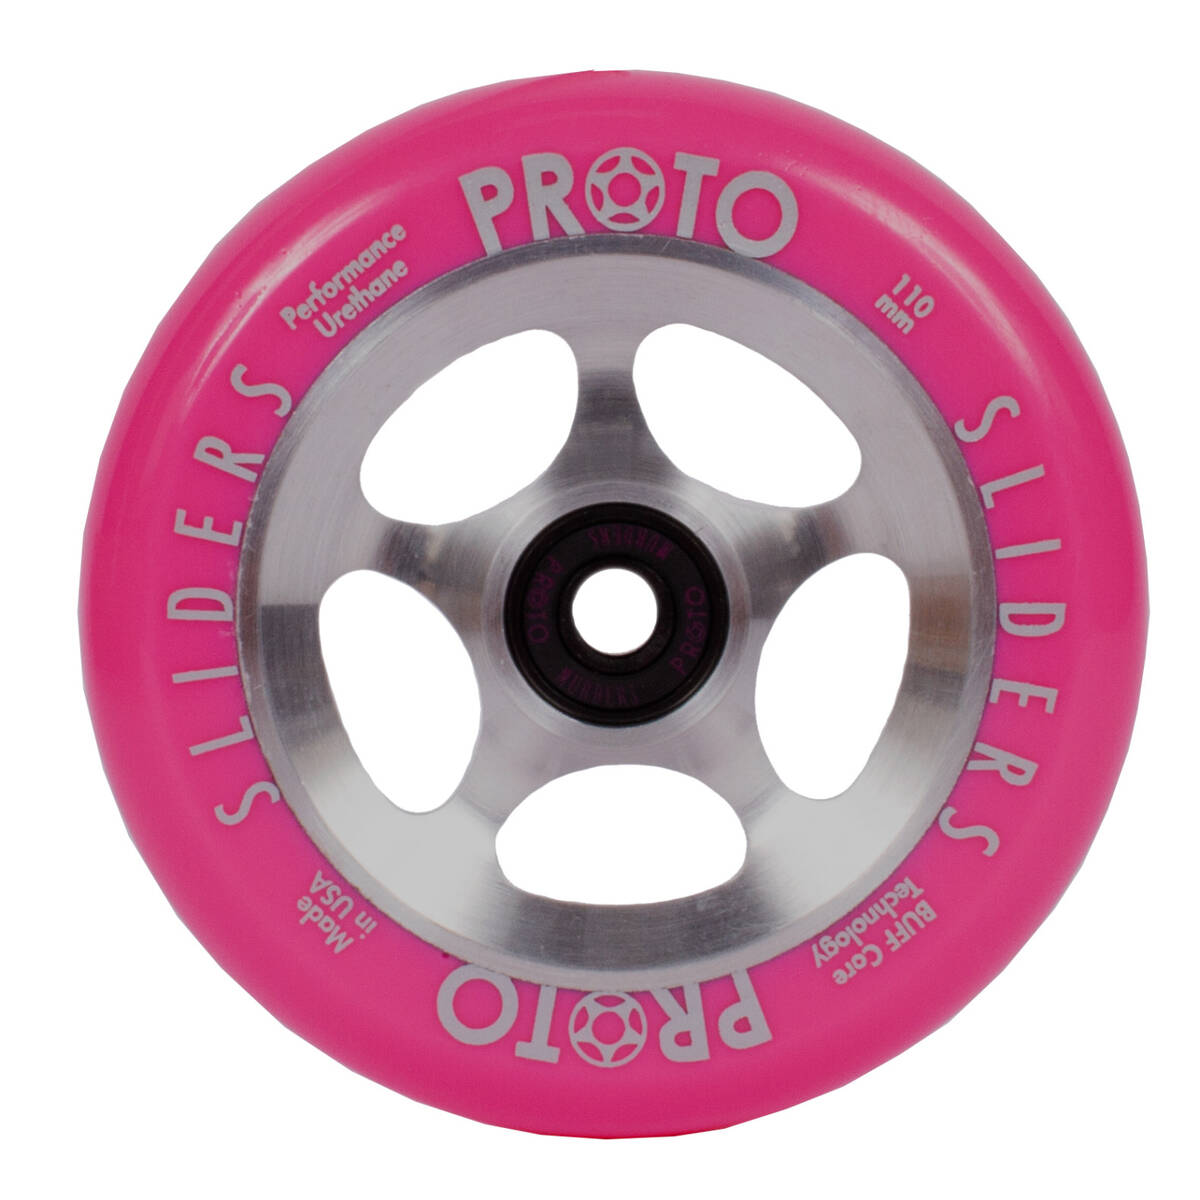 An image of Proto Sliders Starbright 110mm Pro Scooter Wheel - Pink / Raw